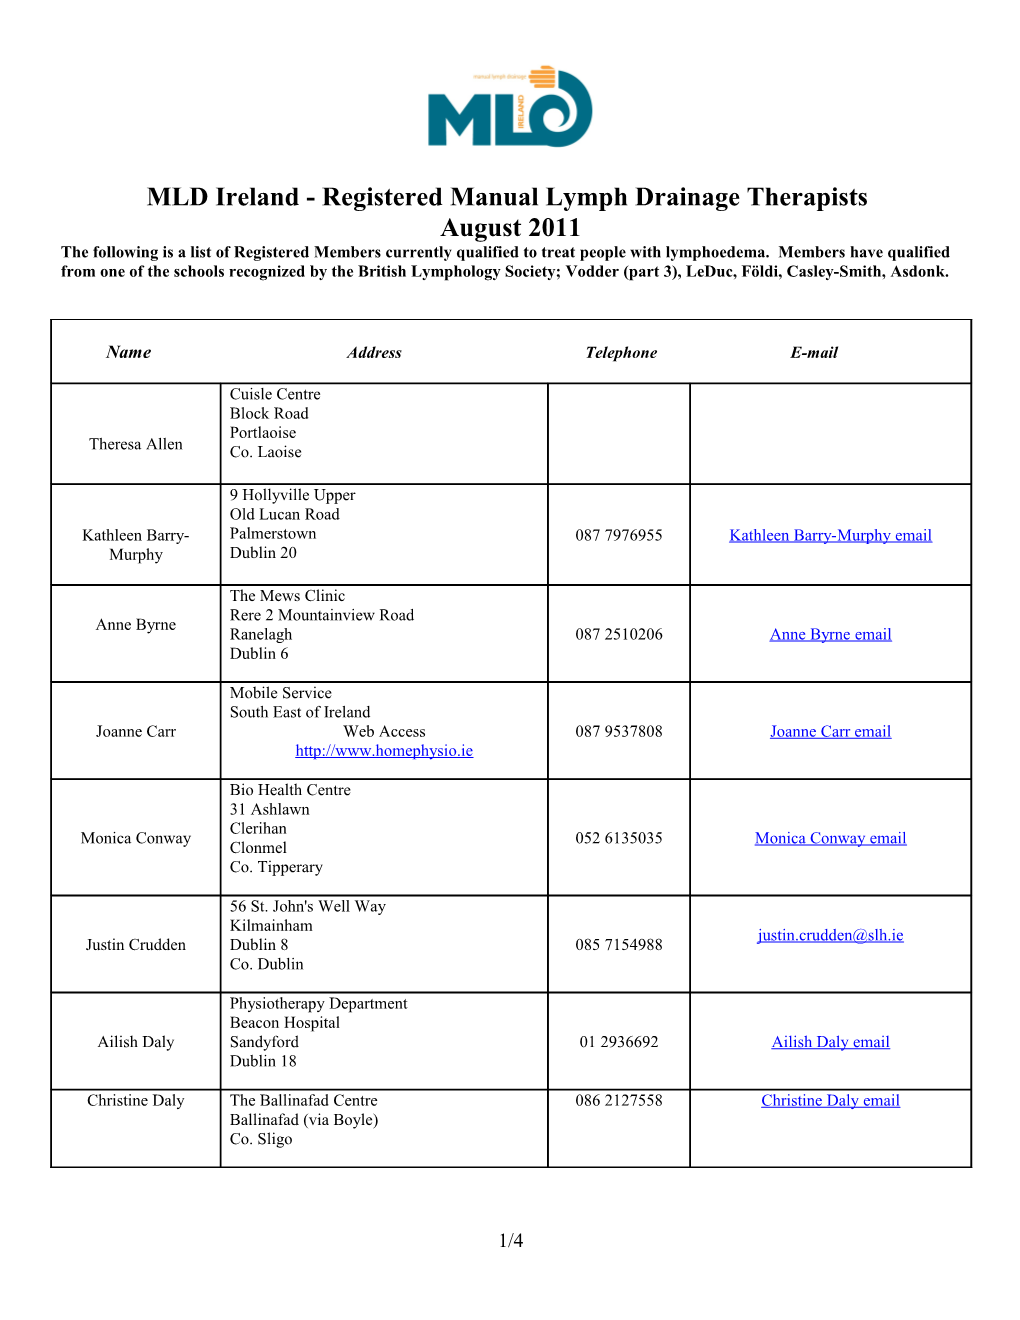 MLD Ireland - Registered Manual Lymph Drainage Therapists August 2006